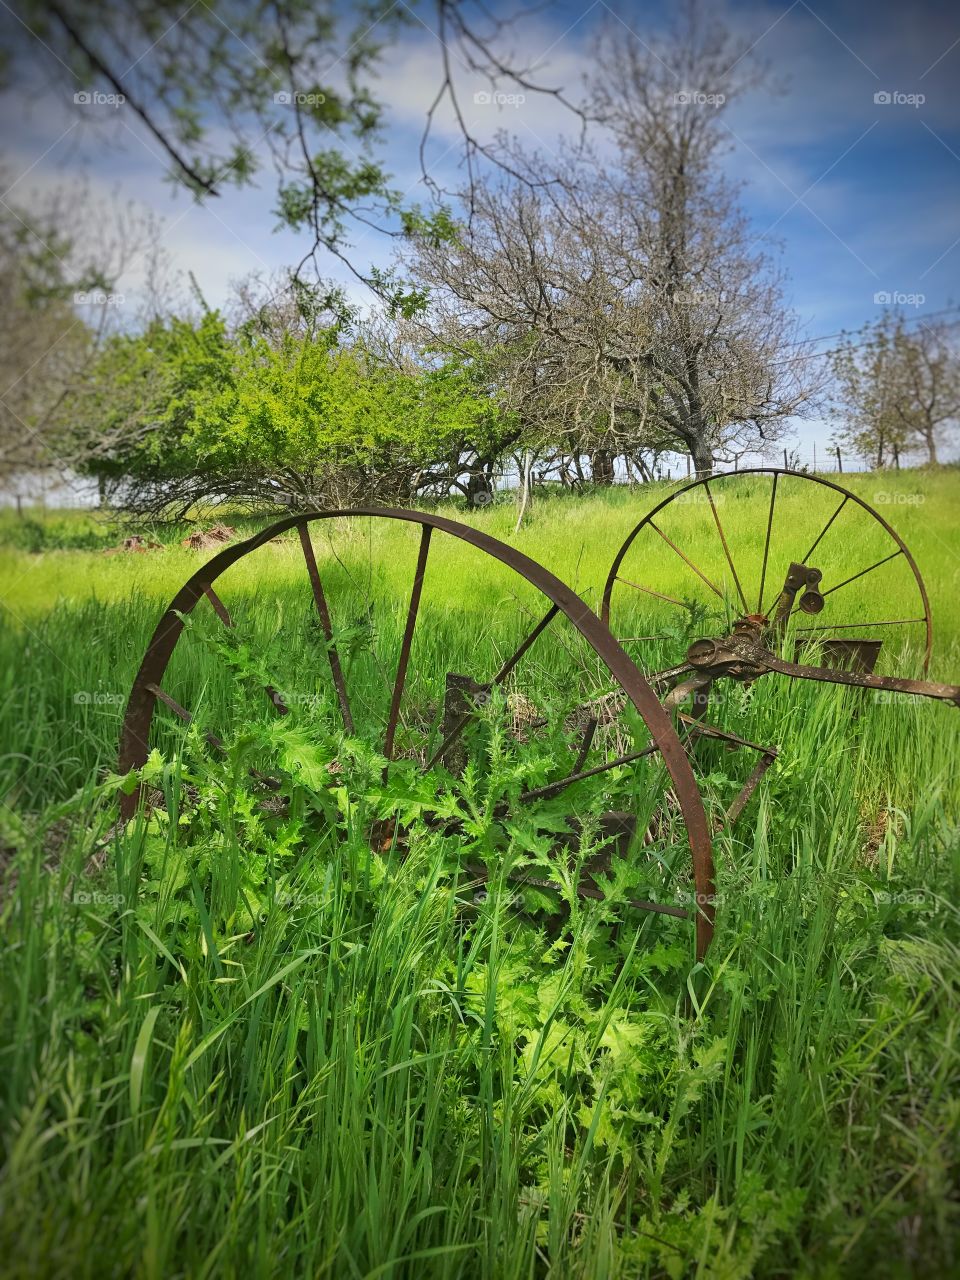 Wagon wheels of days gone by 